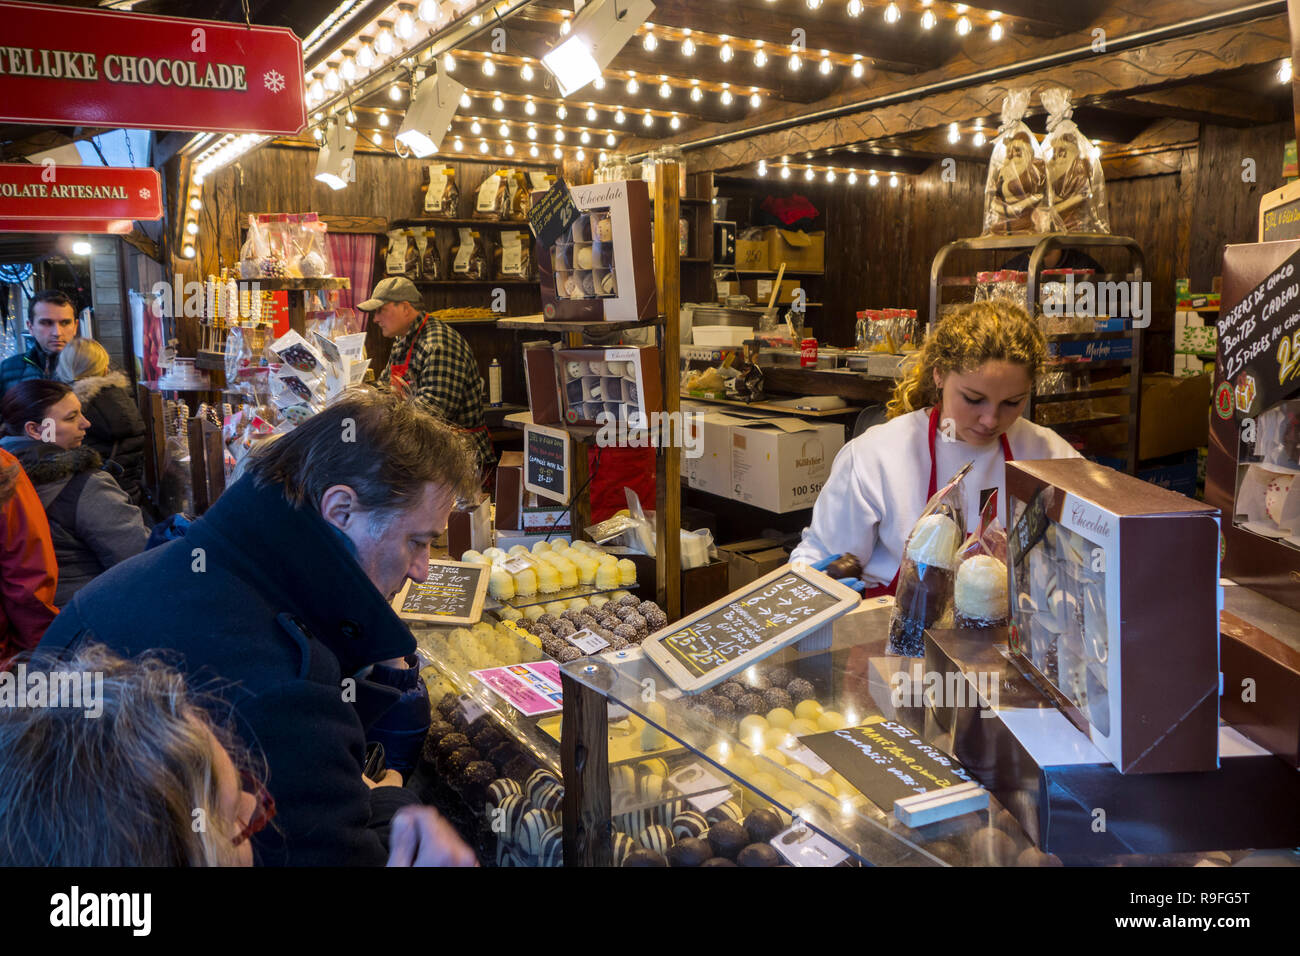 Street vendors selling Belgian chocolate / chocolates in Christmas market  stall in winter in the city Ghent, Flanders, Belgium Stock Photo - Alamy